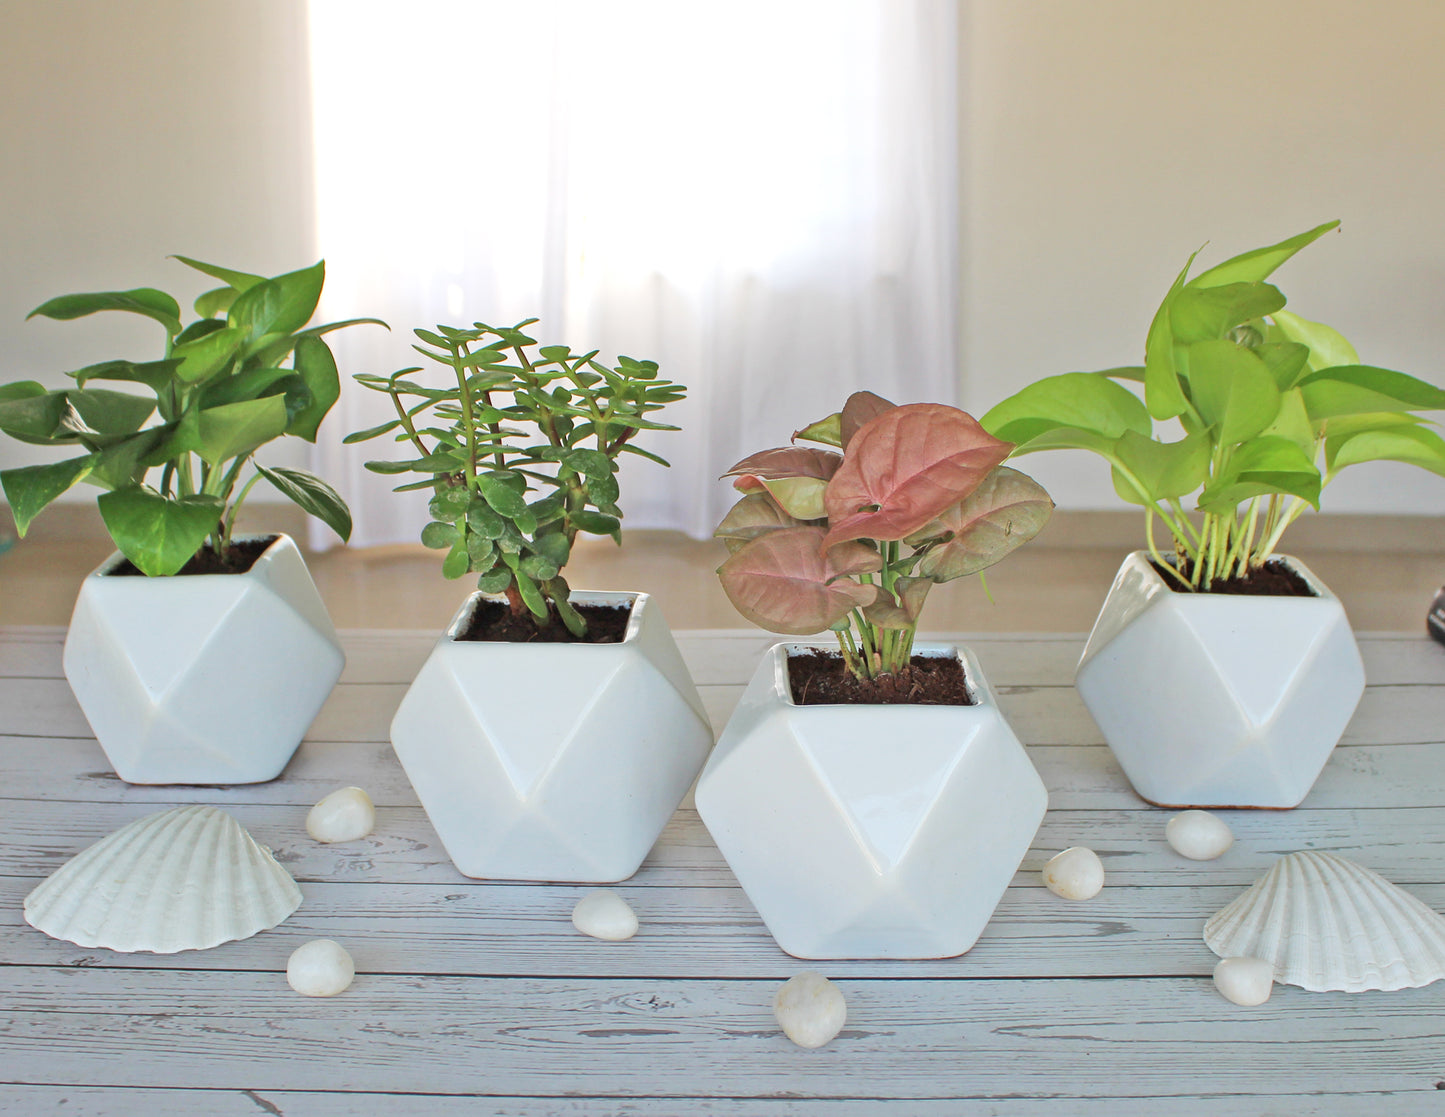 Rolling Nature Combo of Live Indoor Plants for Home Money Plant, Jade Plant, Pink Syngonium and Golden Pothos Plant in White Diamond Glacier Ceramic Pots